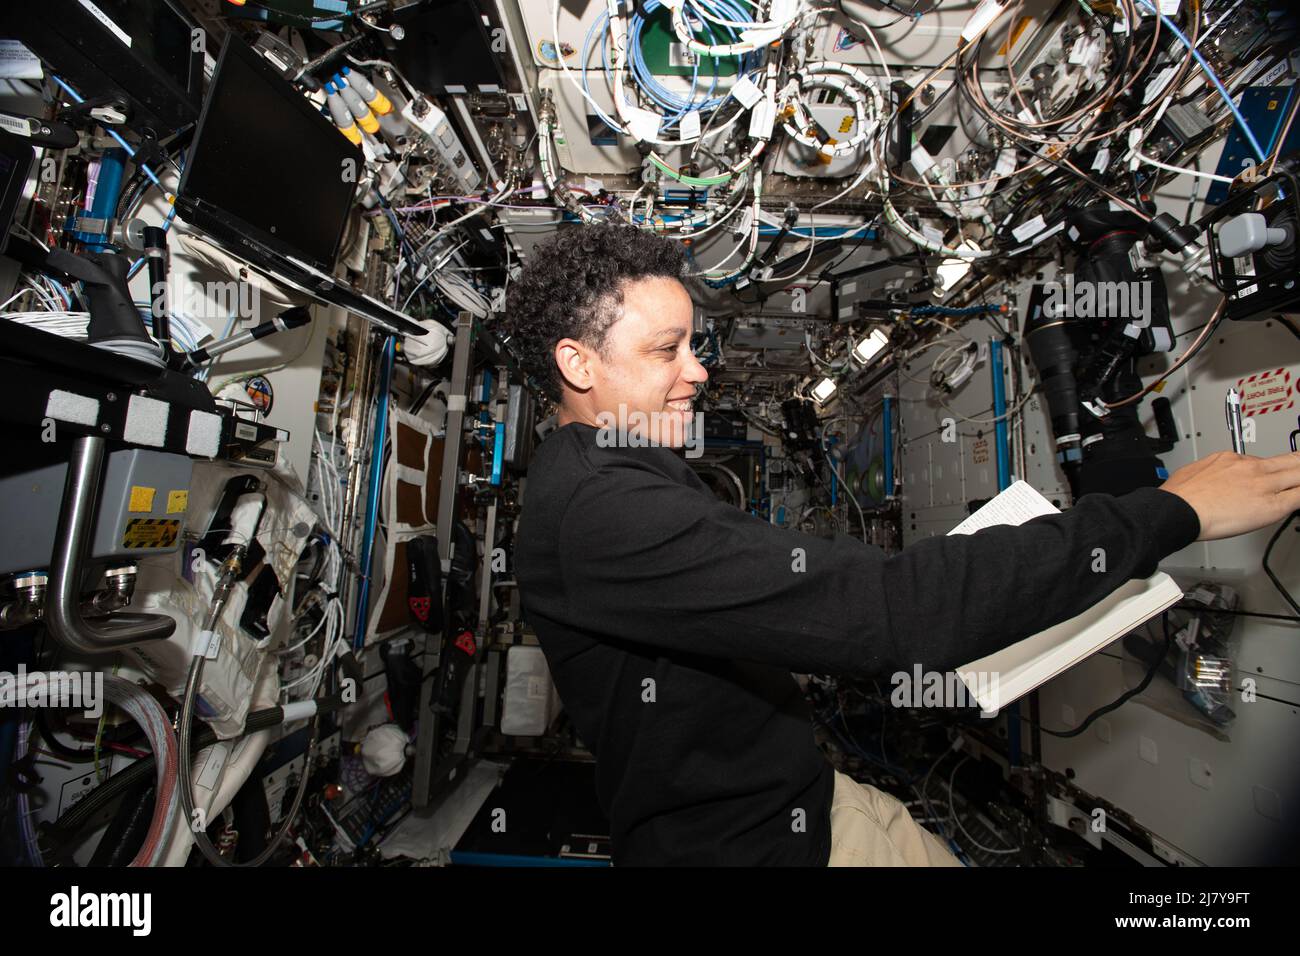 NASA astronaut and Expedition 67 Flight Engineer Jessica Watkins familiarizes herself with systems and procedures of the International Space Station following his recent arrival aboard the orbiting lab, May 1, 2022 in Earth Orbit. Stock Photo